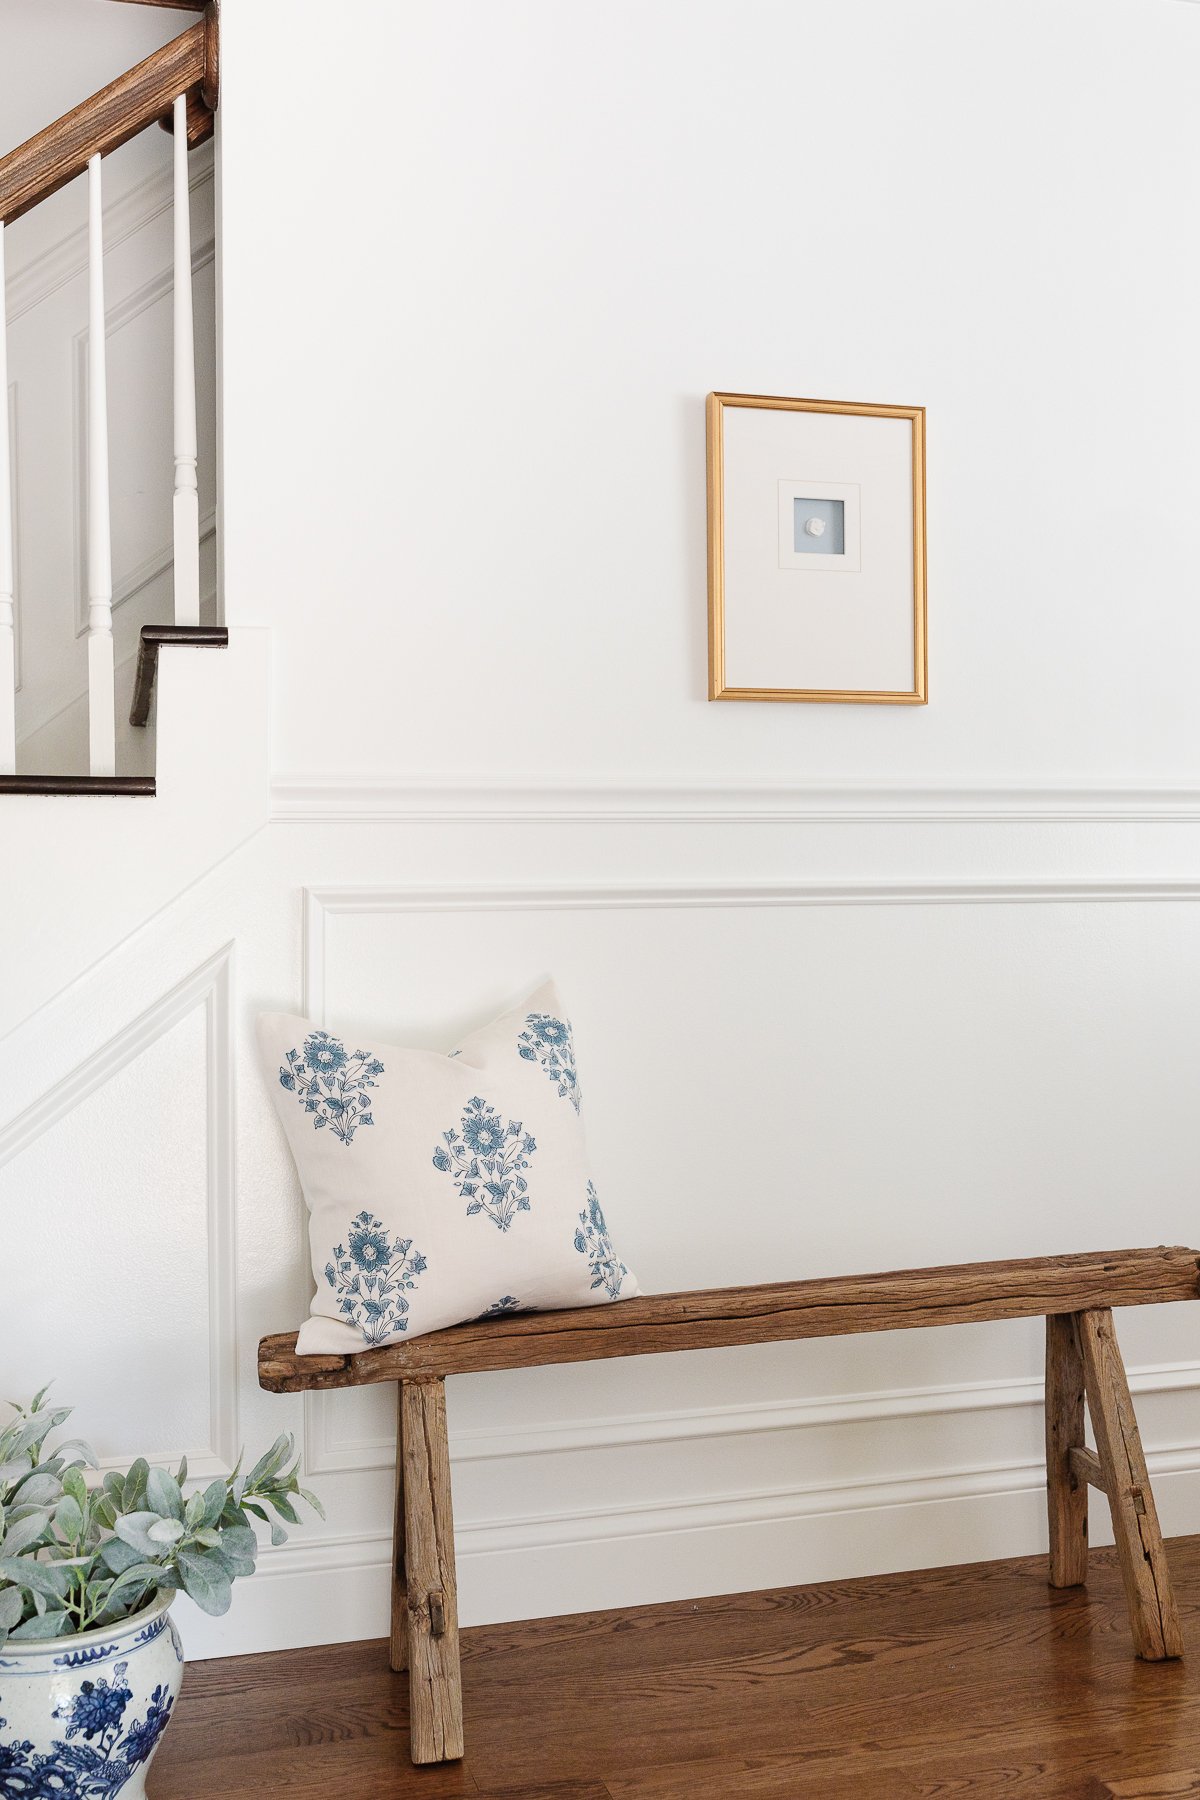 An entryway with a wood bench and picture frame moulding